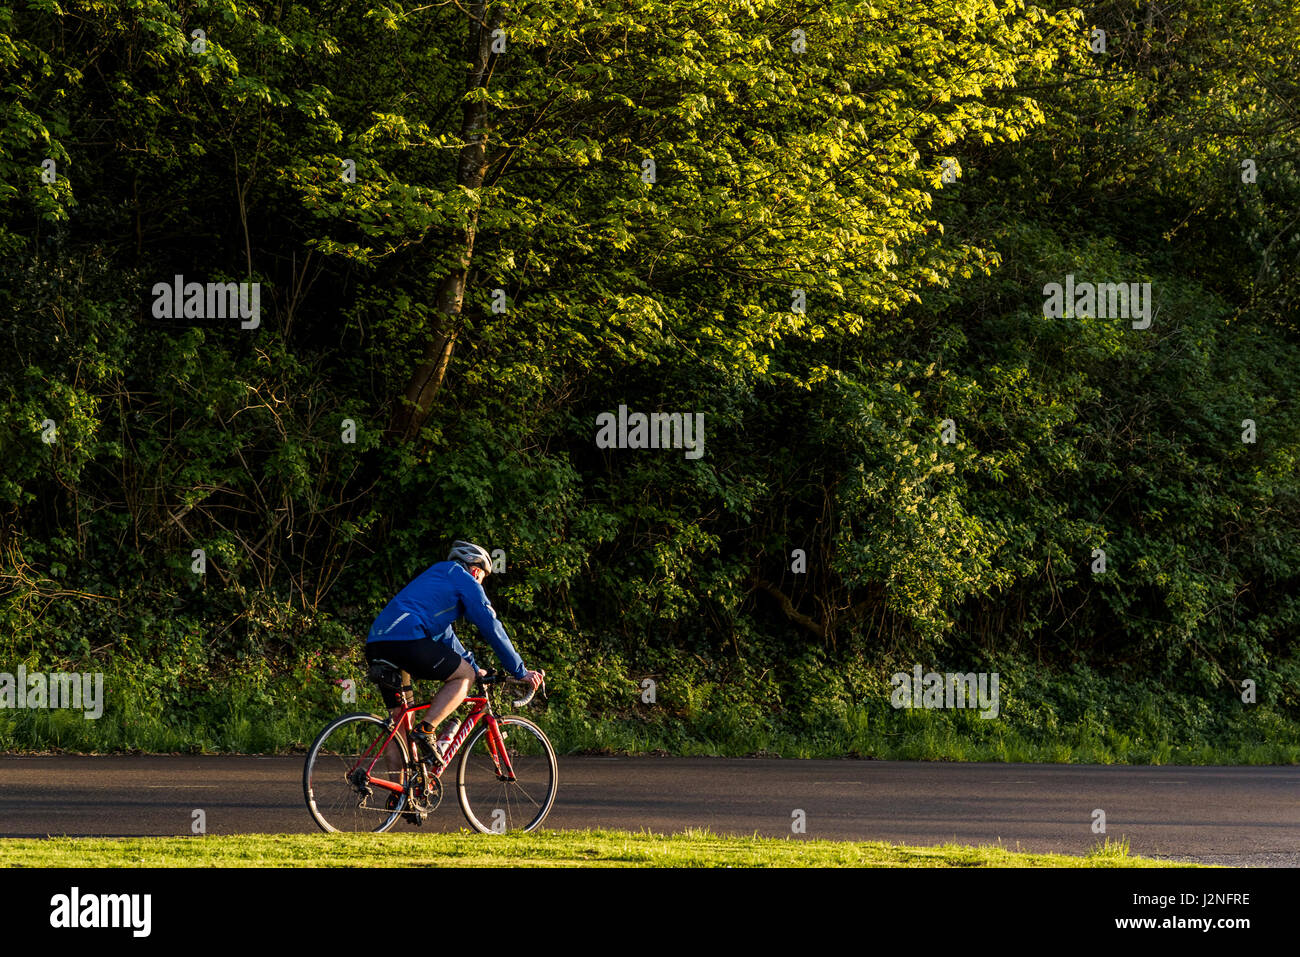 Cyclist, on country road Stock Photo